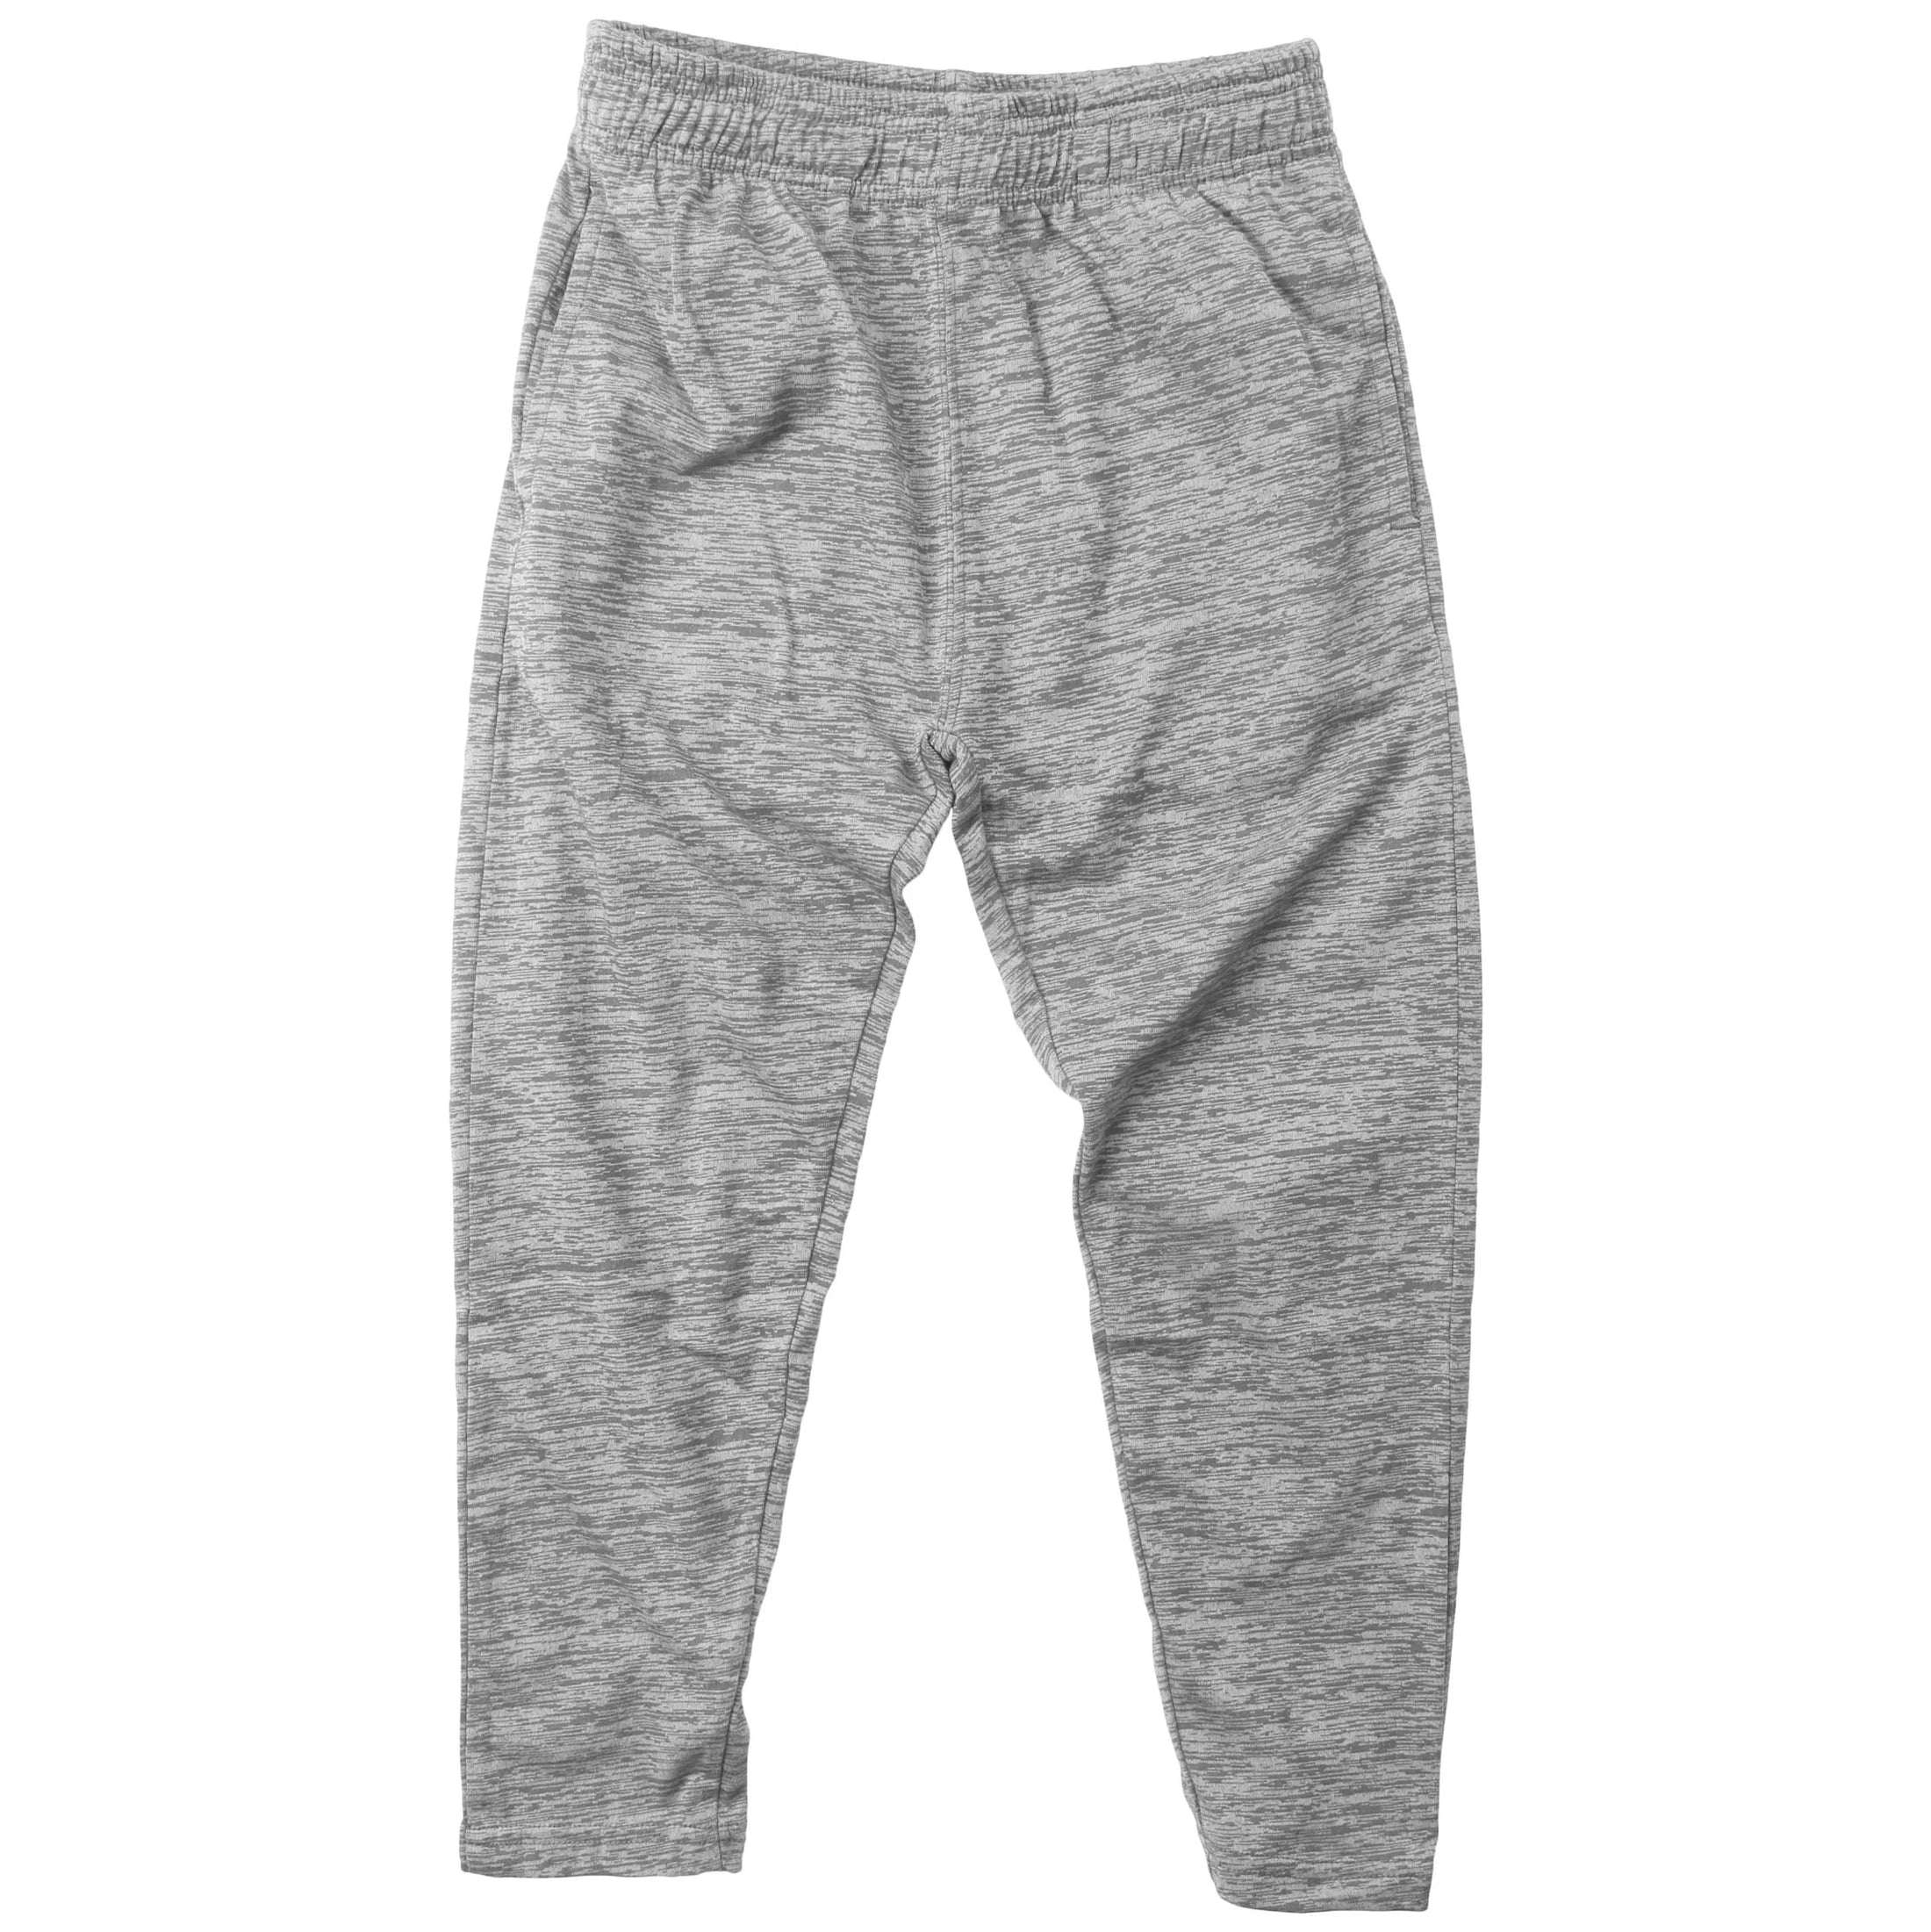 Cloudy Yarn Athletic Pant in Charcoal